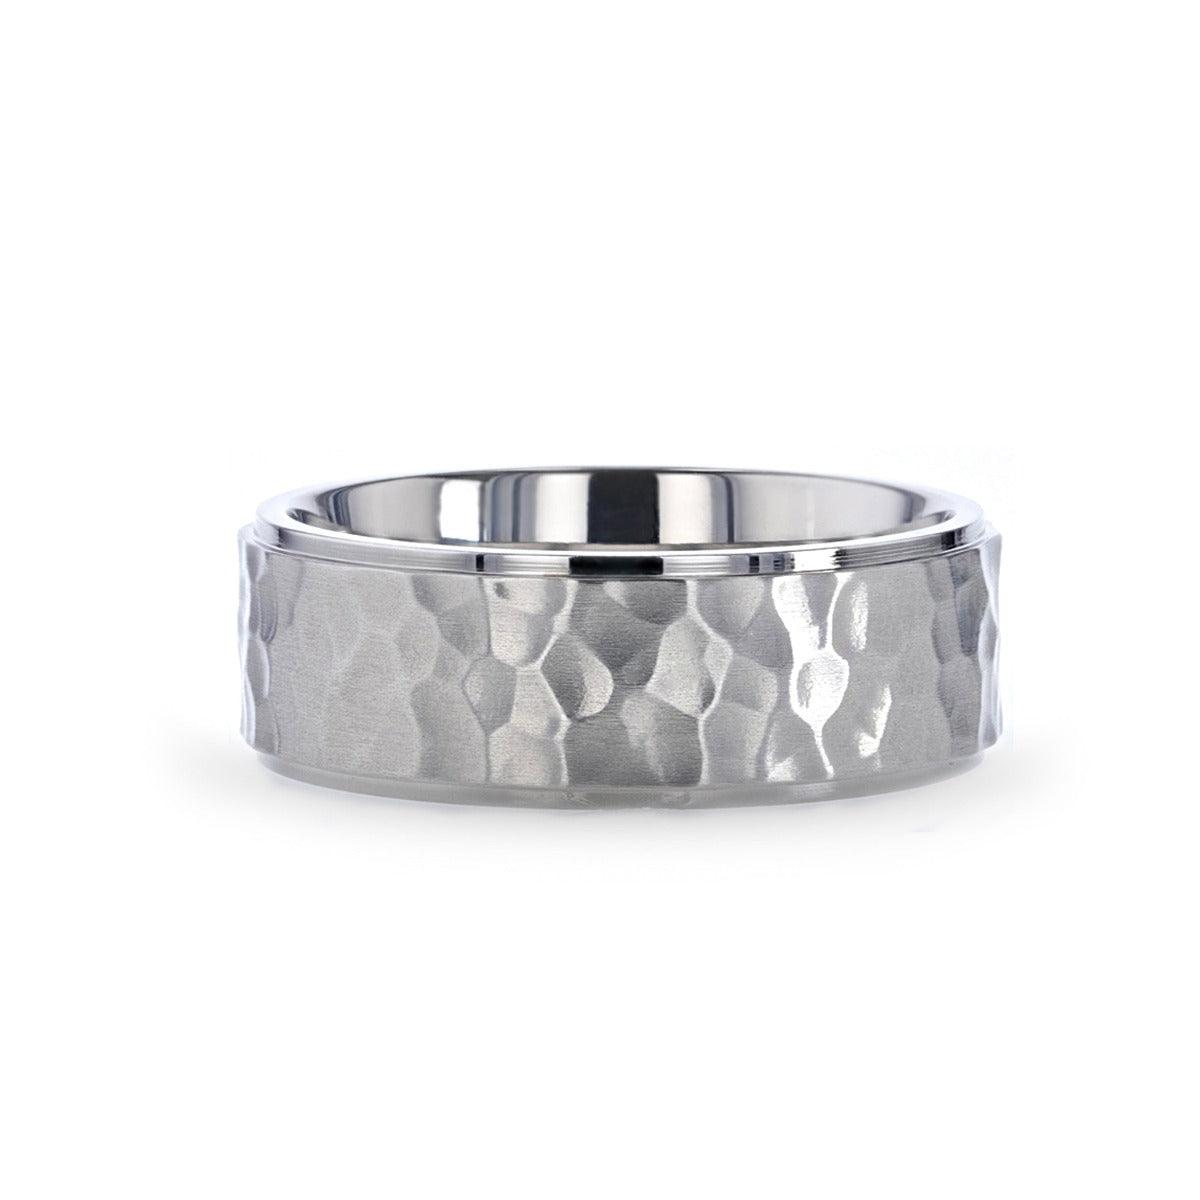 MINISTER - Titanium Ring with Raised Hammered Finish and Polished Step Edges - 8 mm - The Rutile Ltd